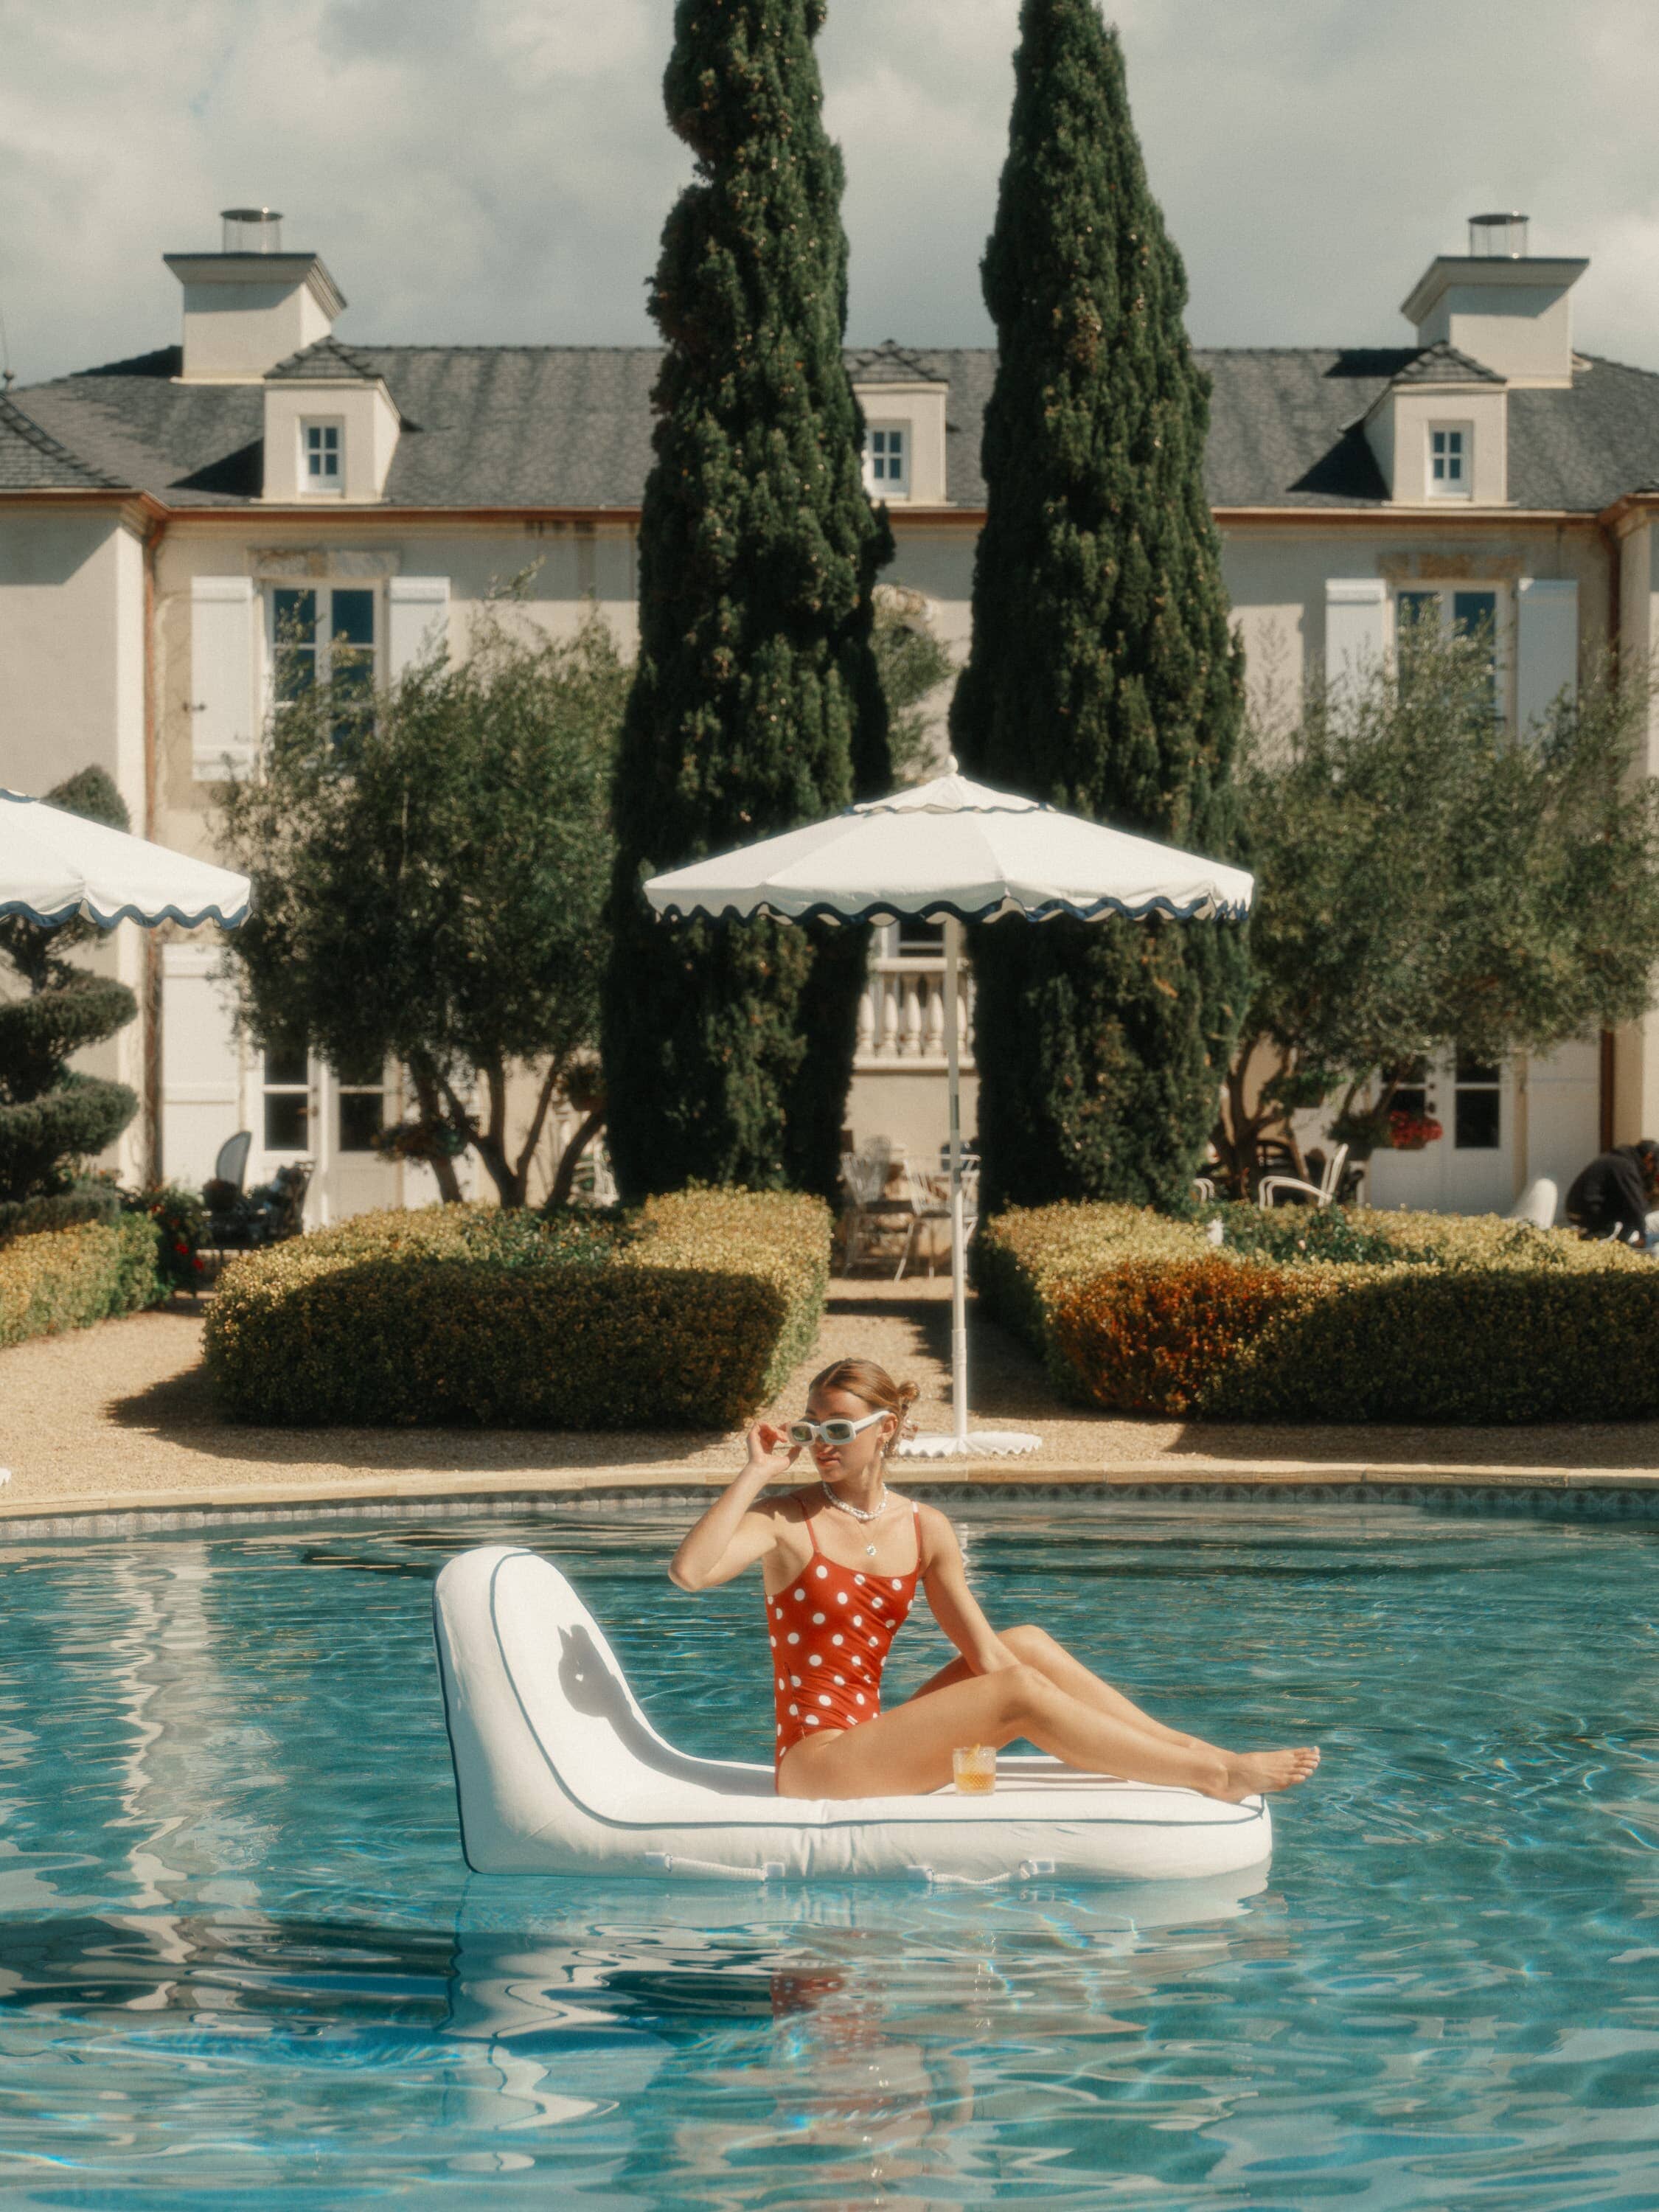 girl floating on a white pool lounger in the pool